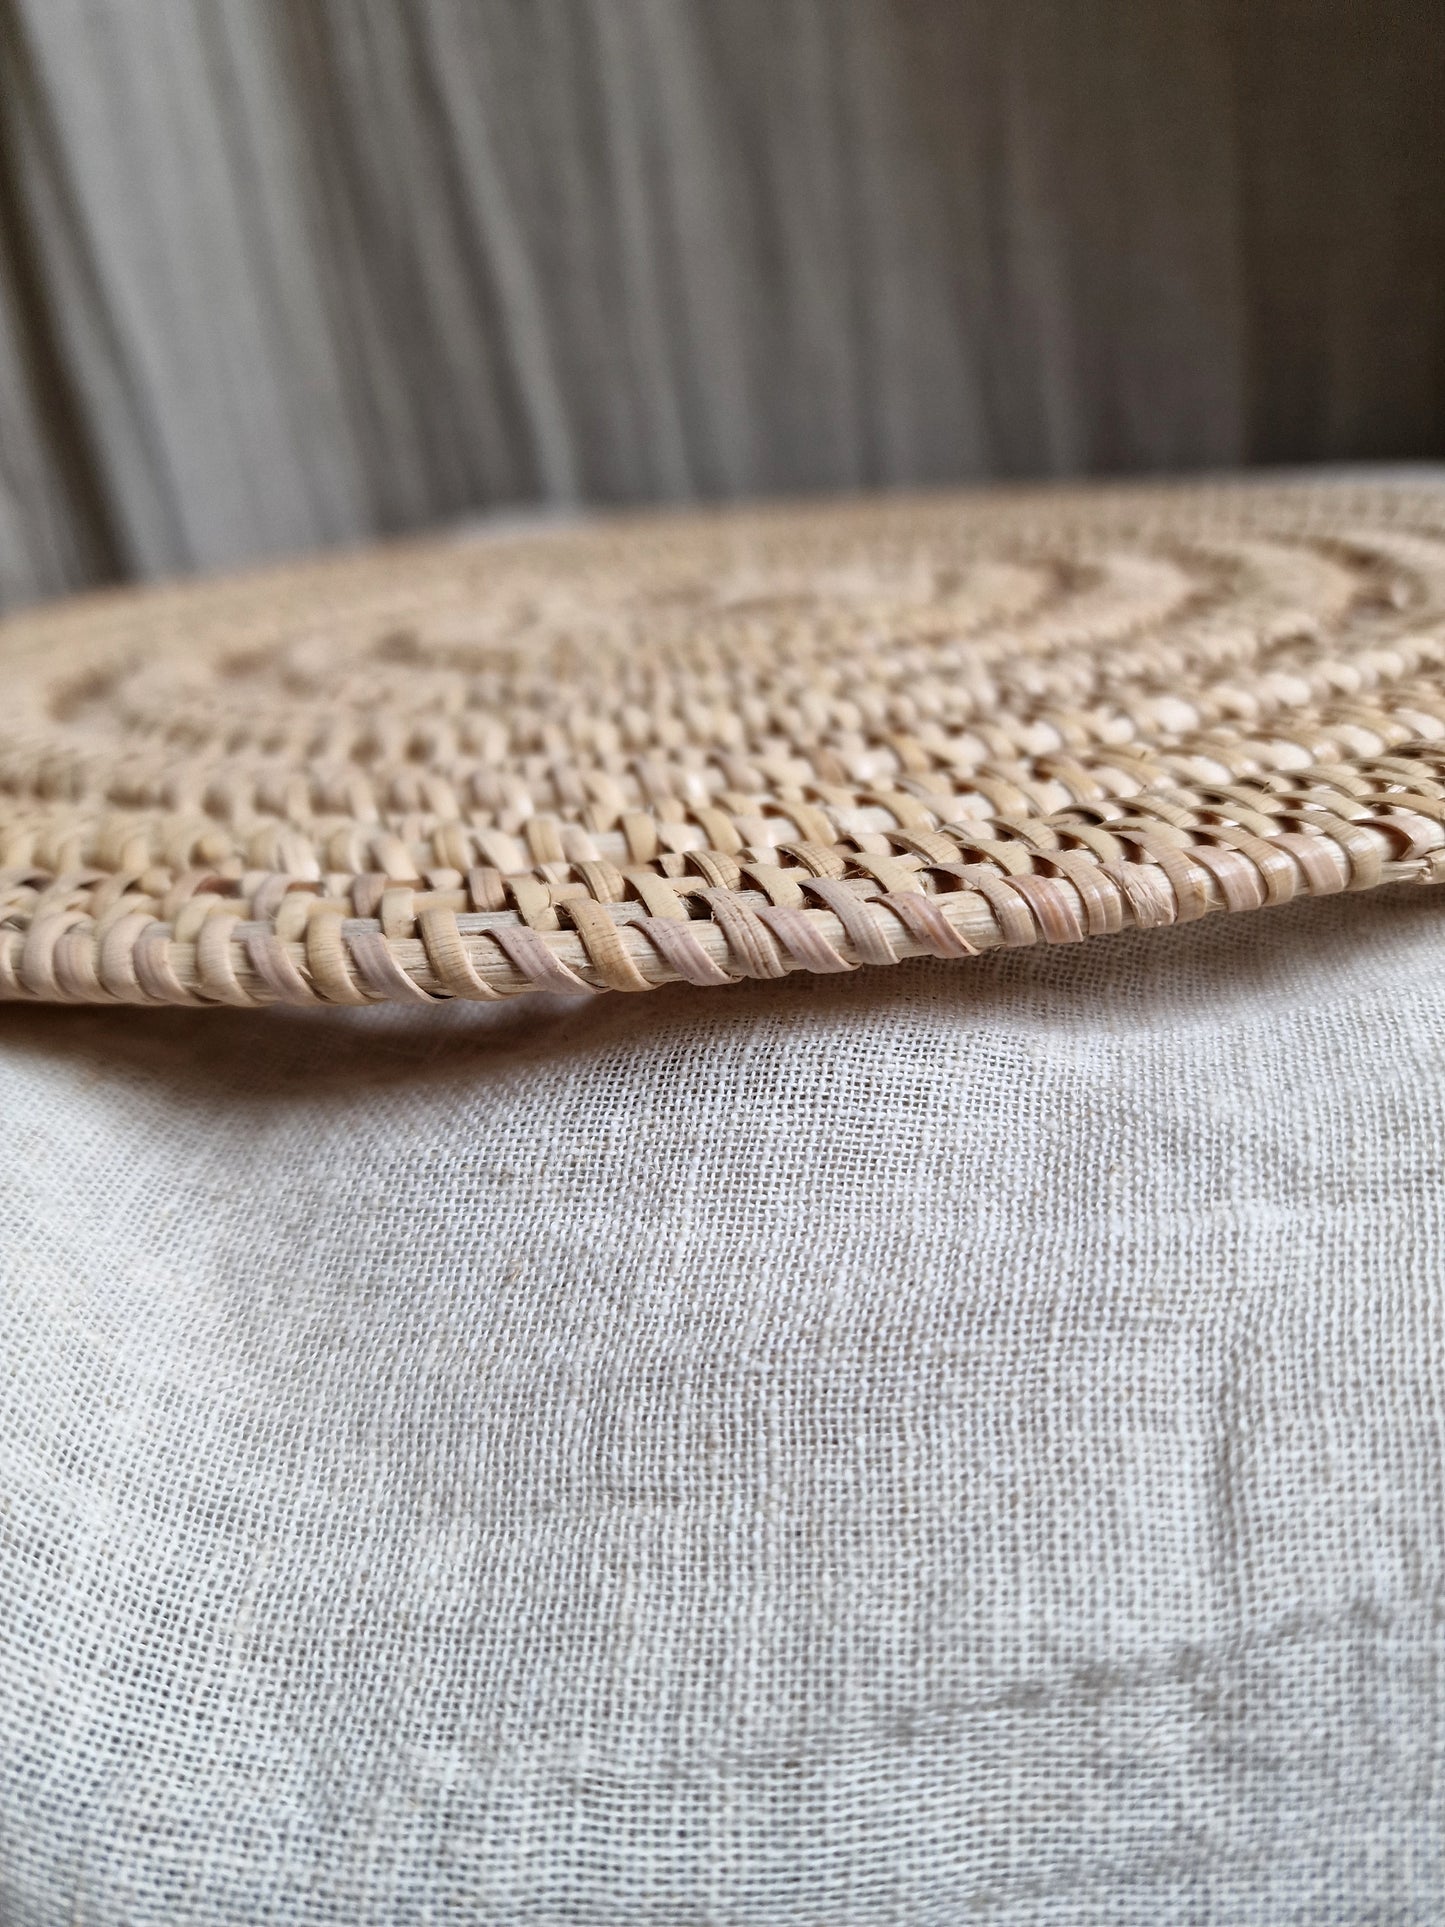 Placemate Rattan